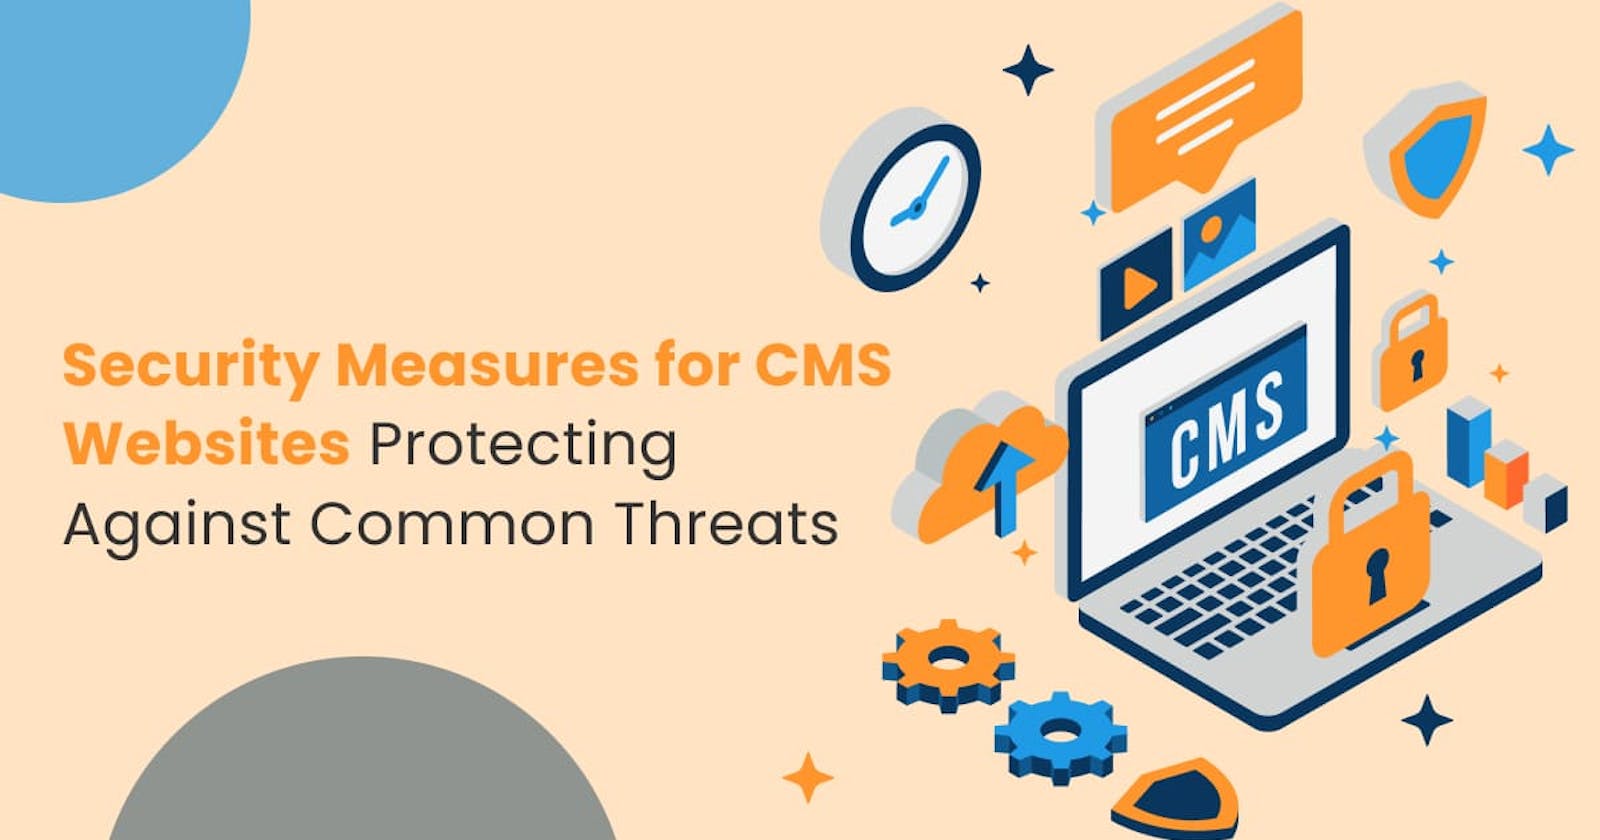 Security Measures for CMS Websites: Protecting Against Common Threats